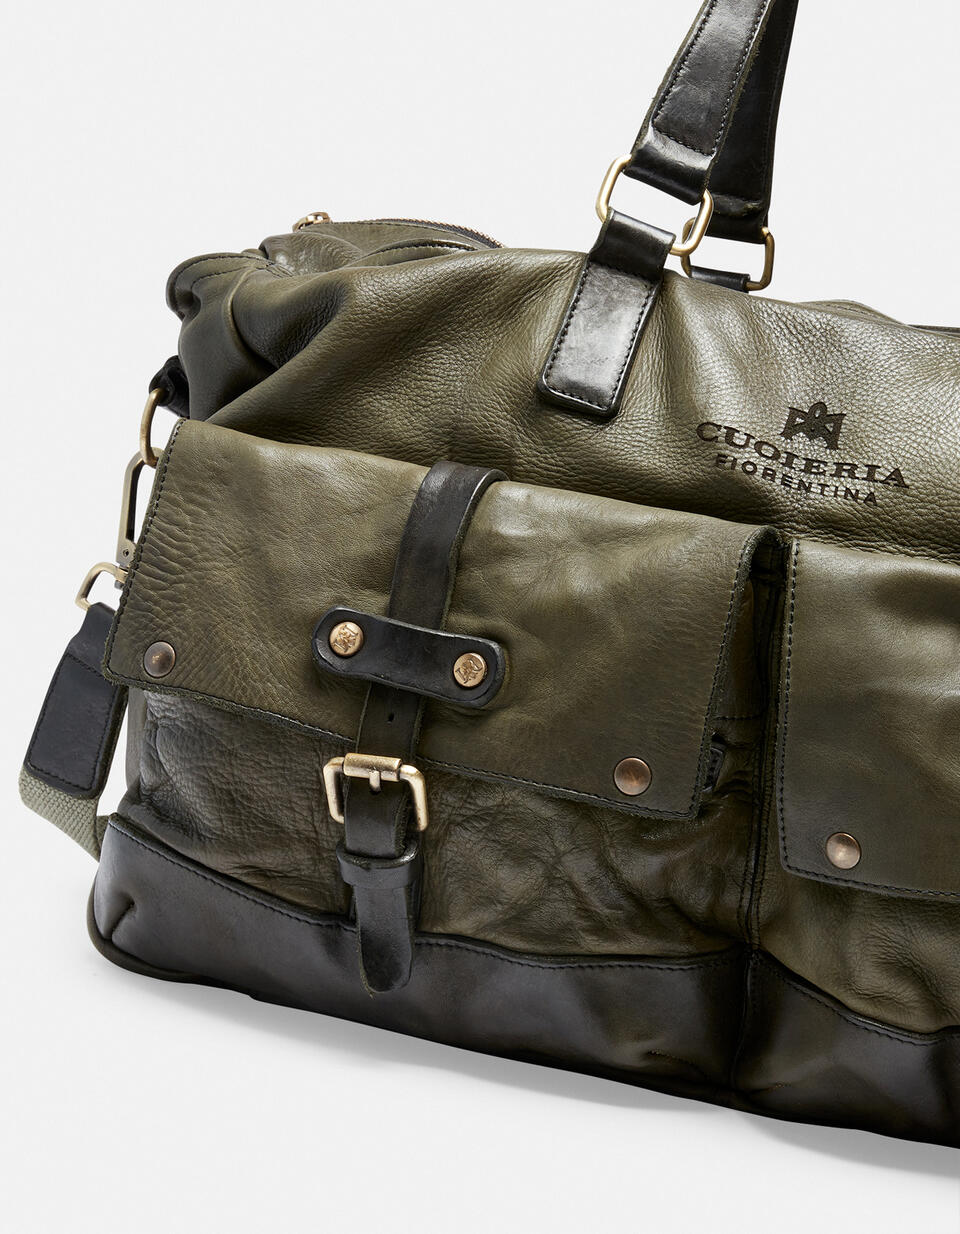 Millennial weekender bag - Luggage | TRAVEL BAGS  - Luggage | TRAVEL BAGSCuoieria Fiorentina